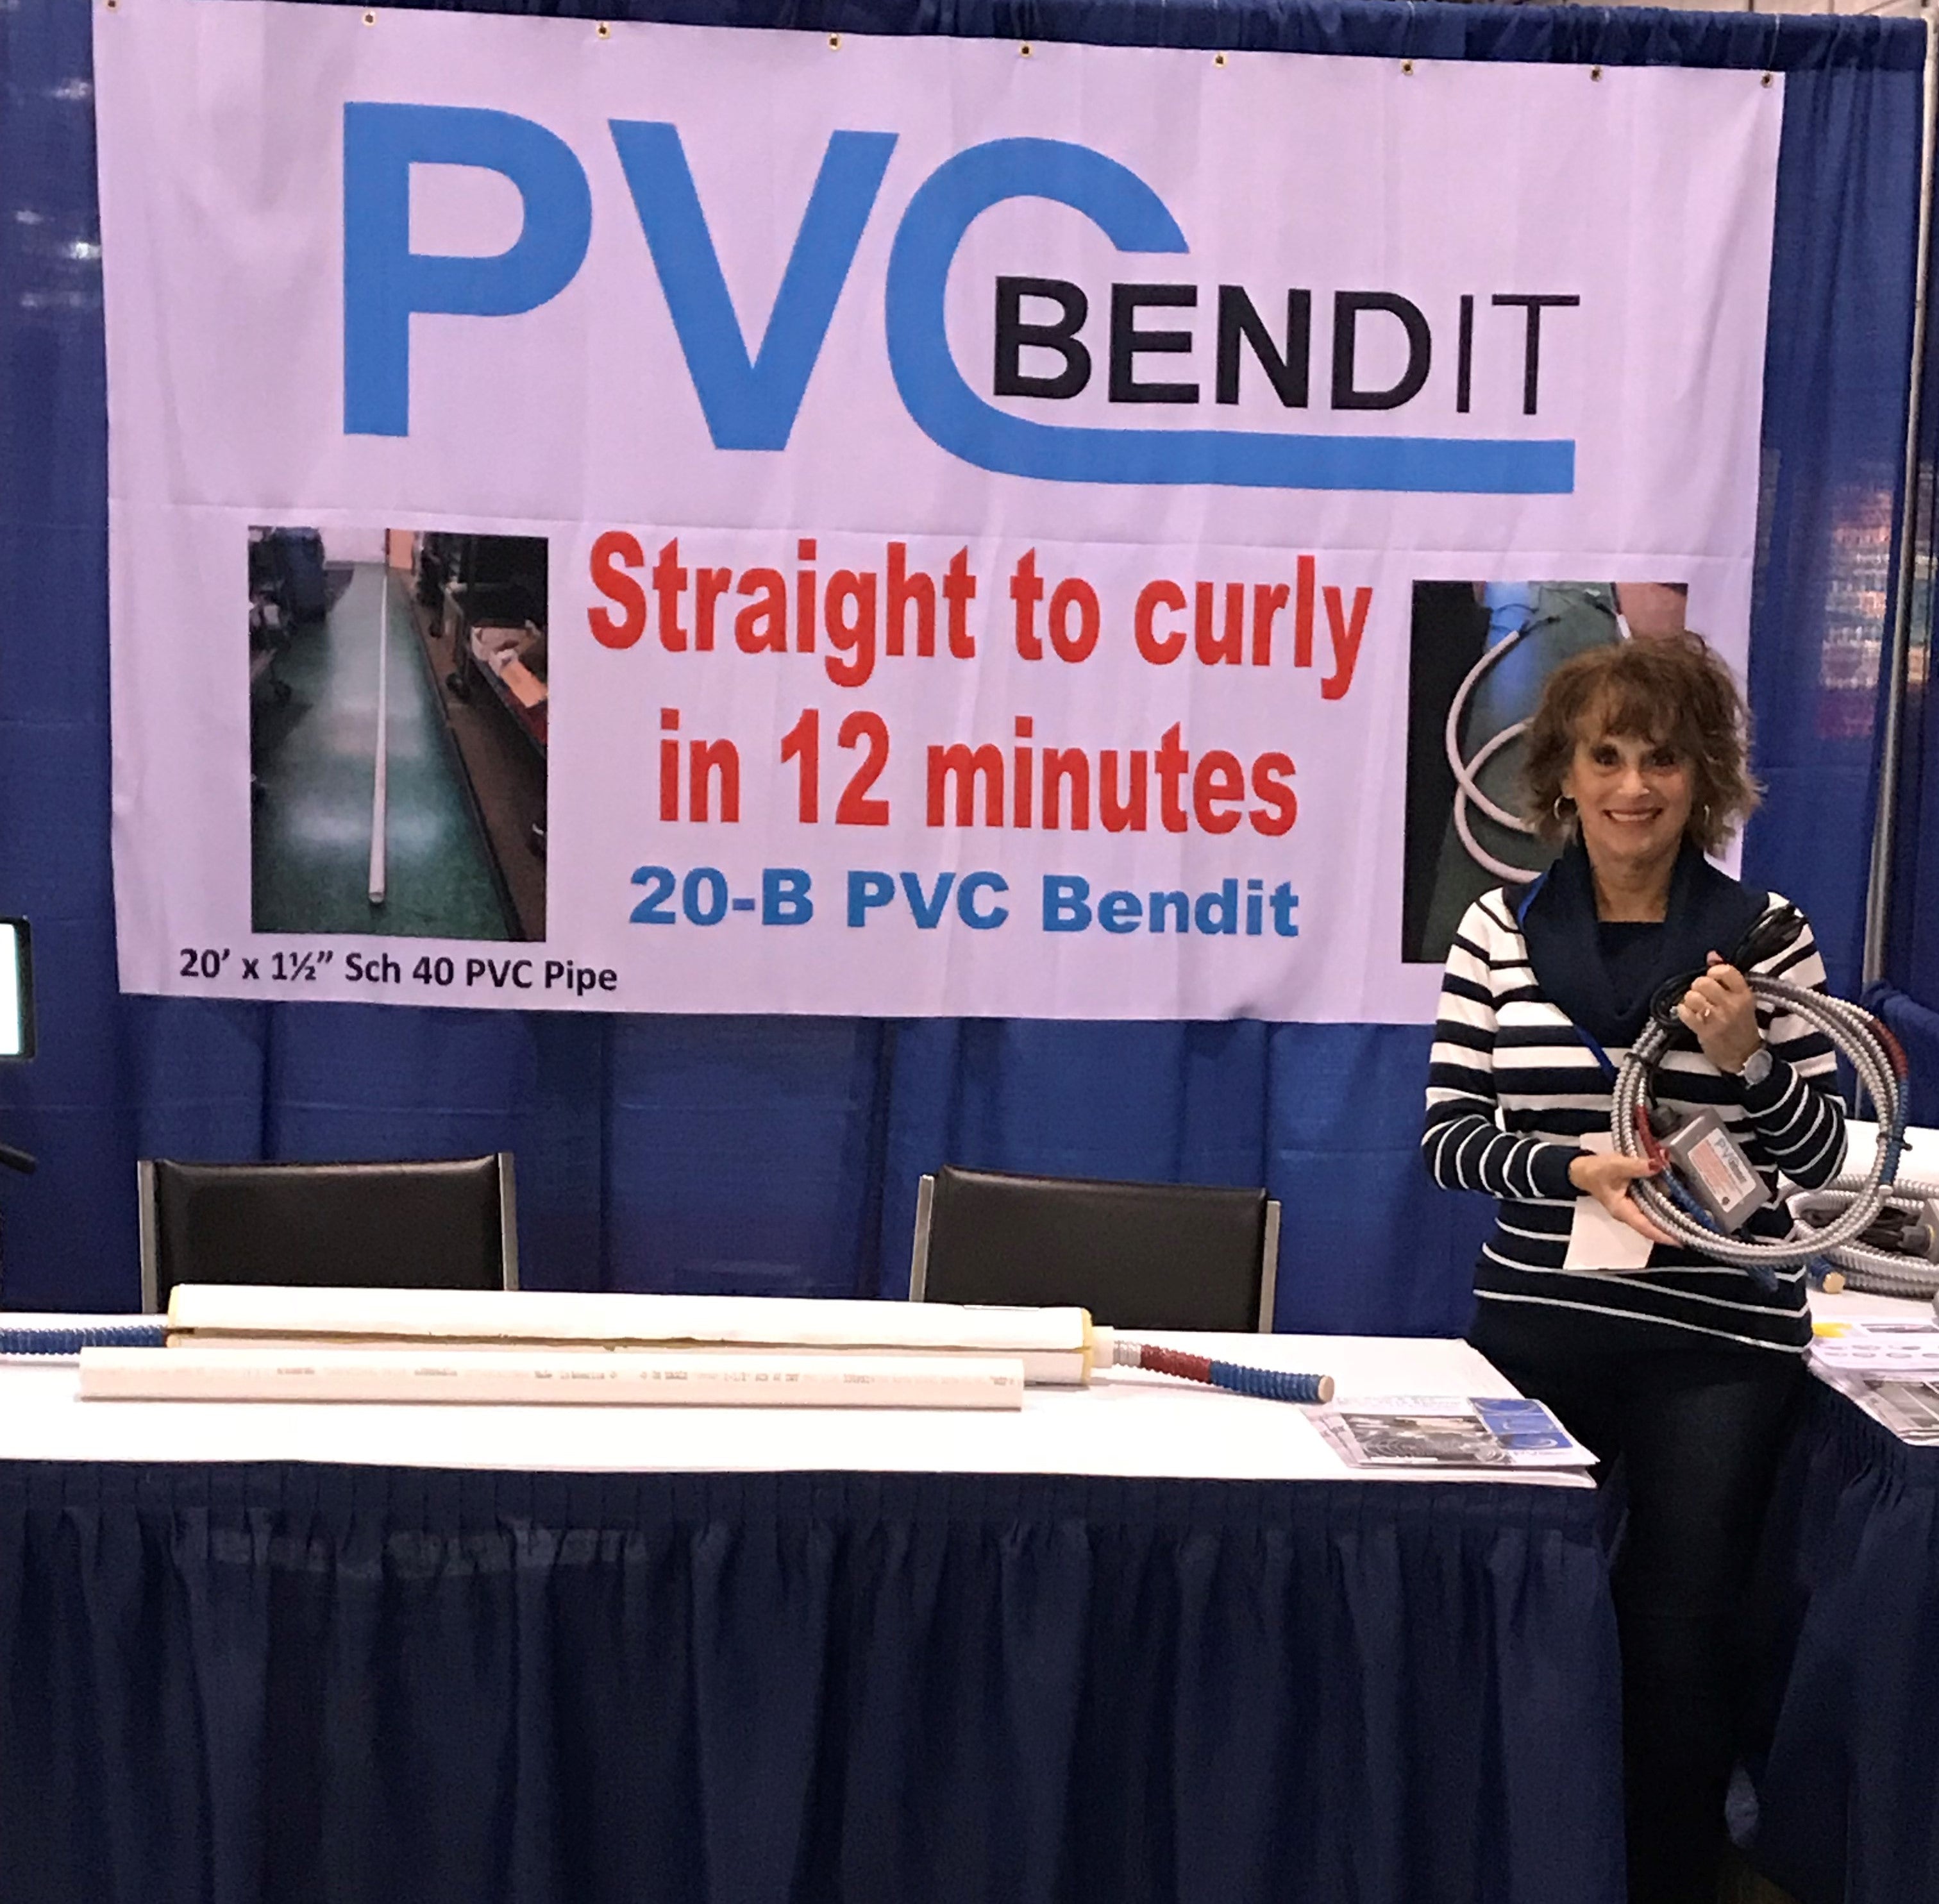 pvc-pipe-bending-booth-at-pool-and-spa-show-with-ilene-img-2-2648.jpg